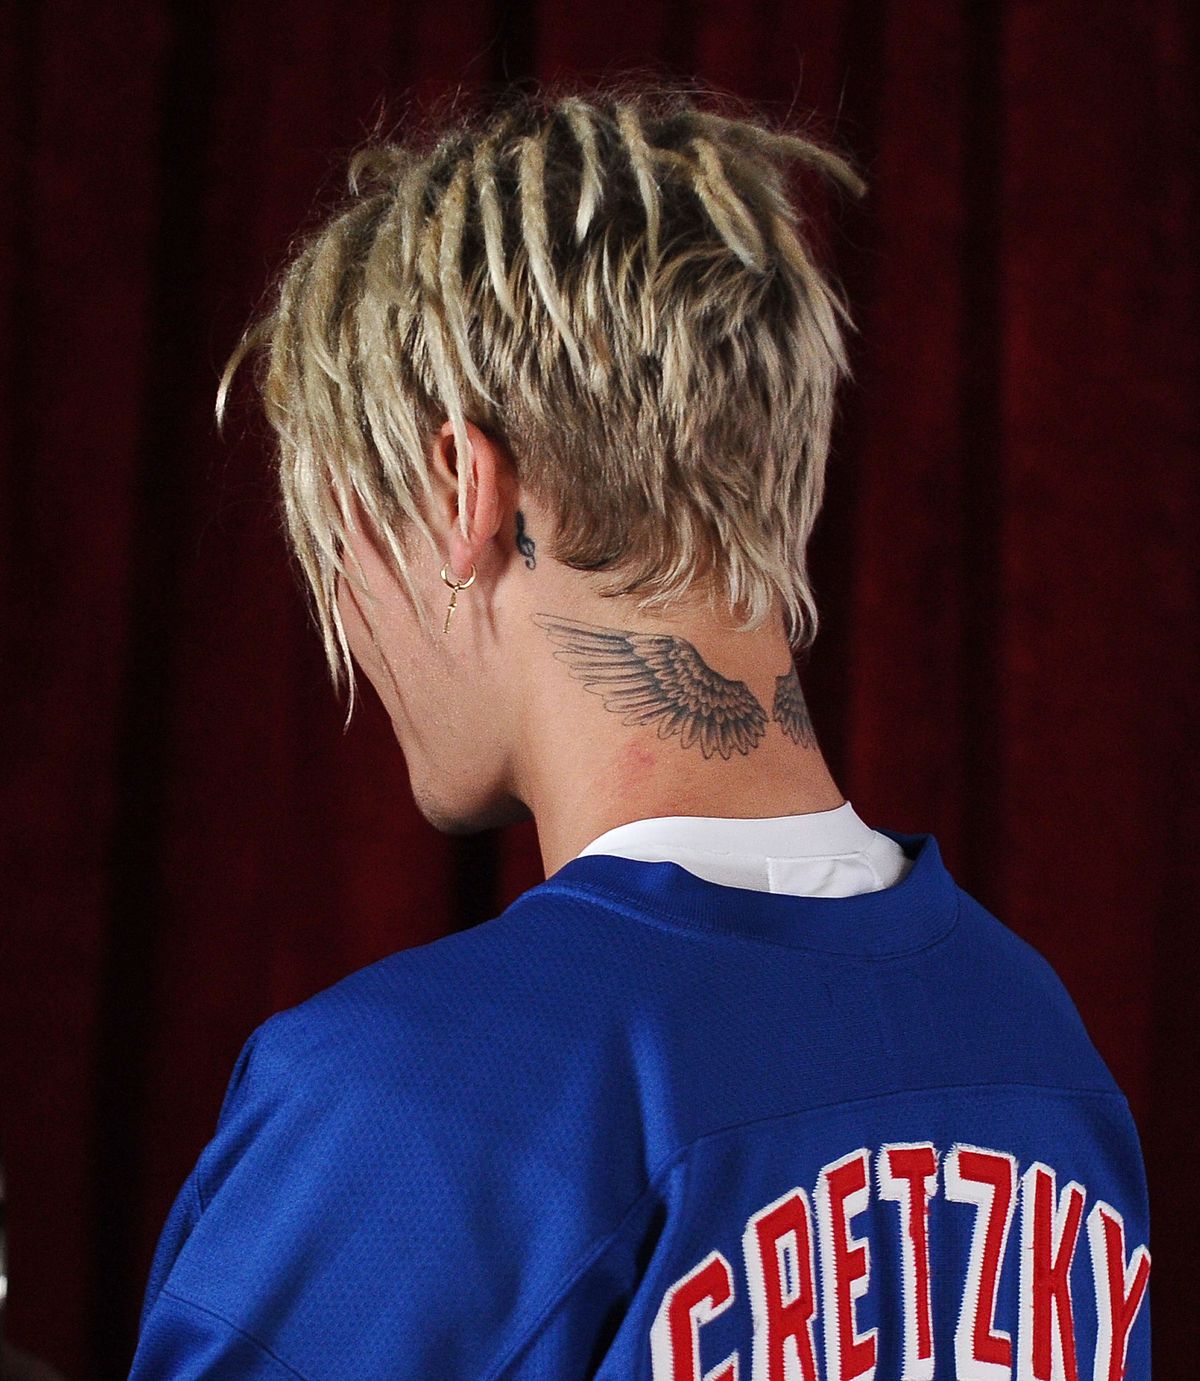 inglewood, california   april 03  justin bieber, hair detail, poses in the press room at the iheartradio music awards at the forum on april 3, 2016 in inglewood, california  photo by jason laverisfilmmagic